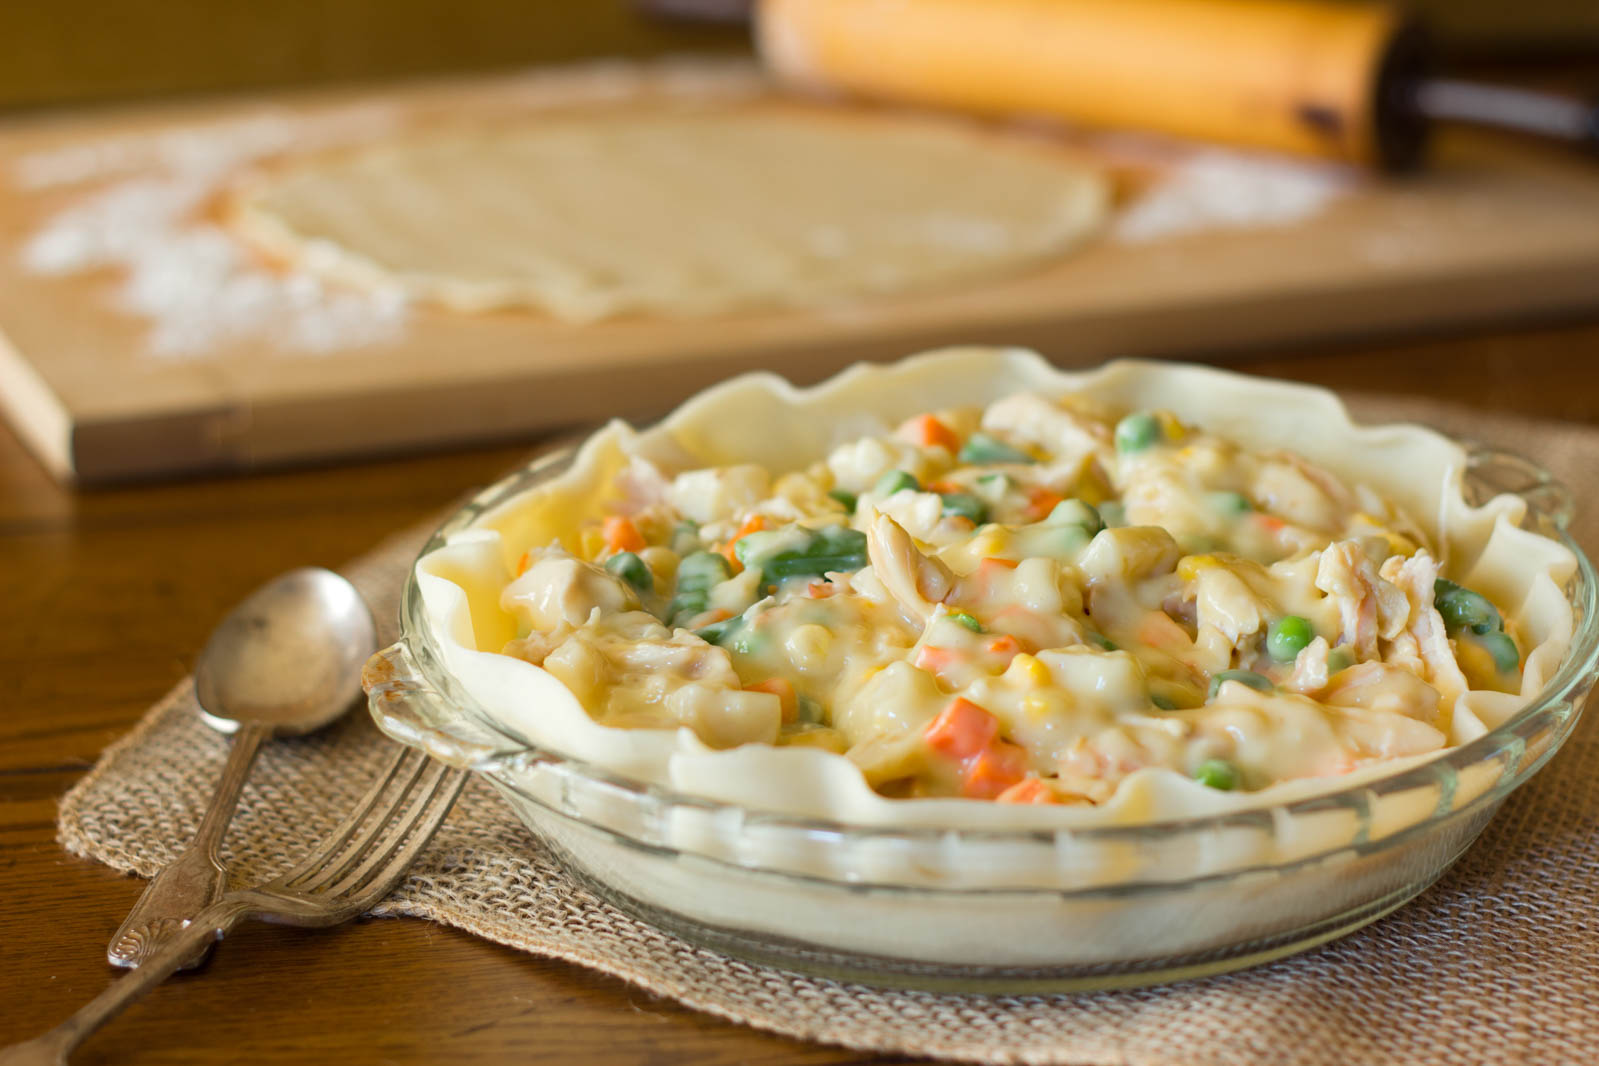 Delicious Dinner Recipes - Homemade Chicken Pot Pie is a Family Favorite